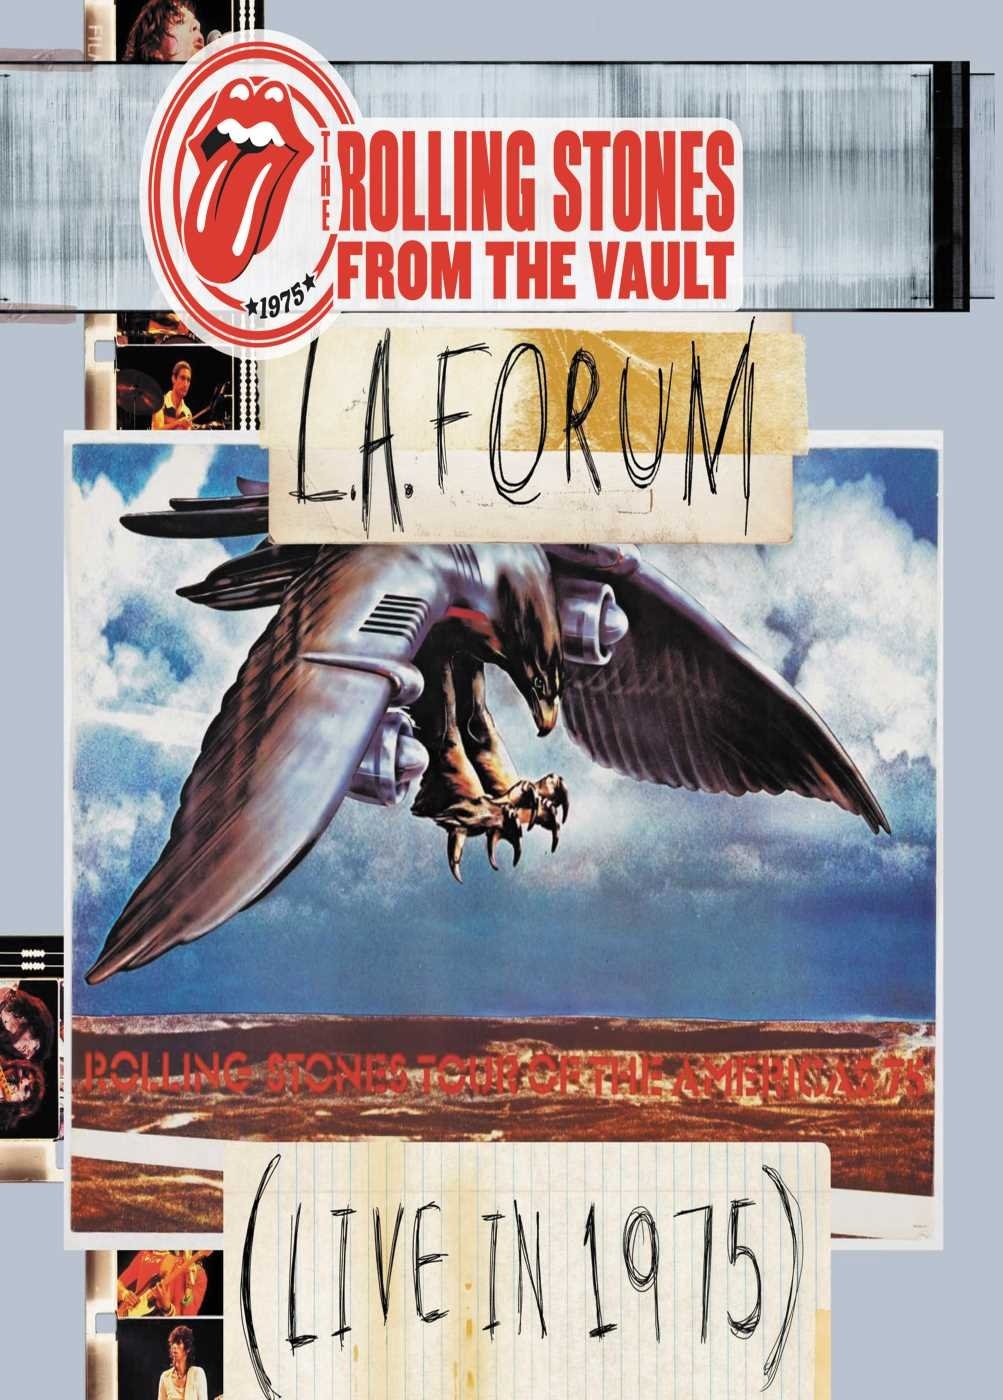 From The Vault: L.A. Forum 1975 (Ltd. Deluxe Boxset DVD & 2-CD)